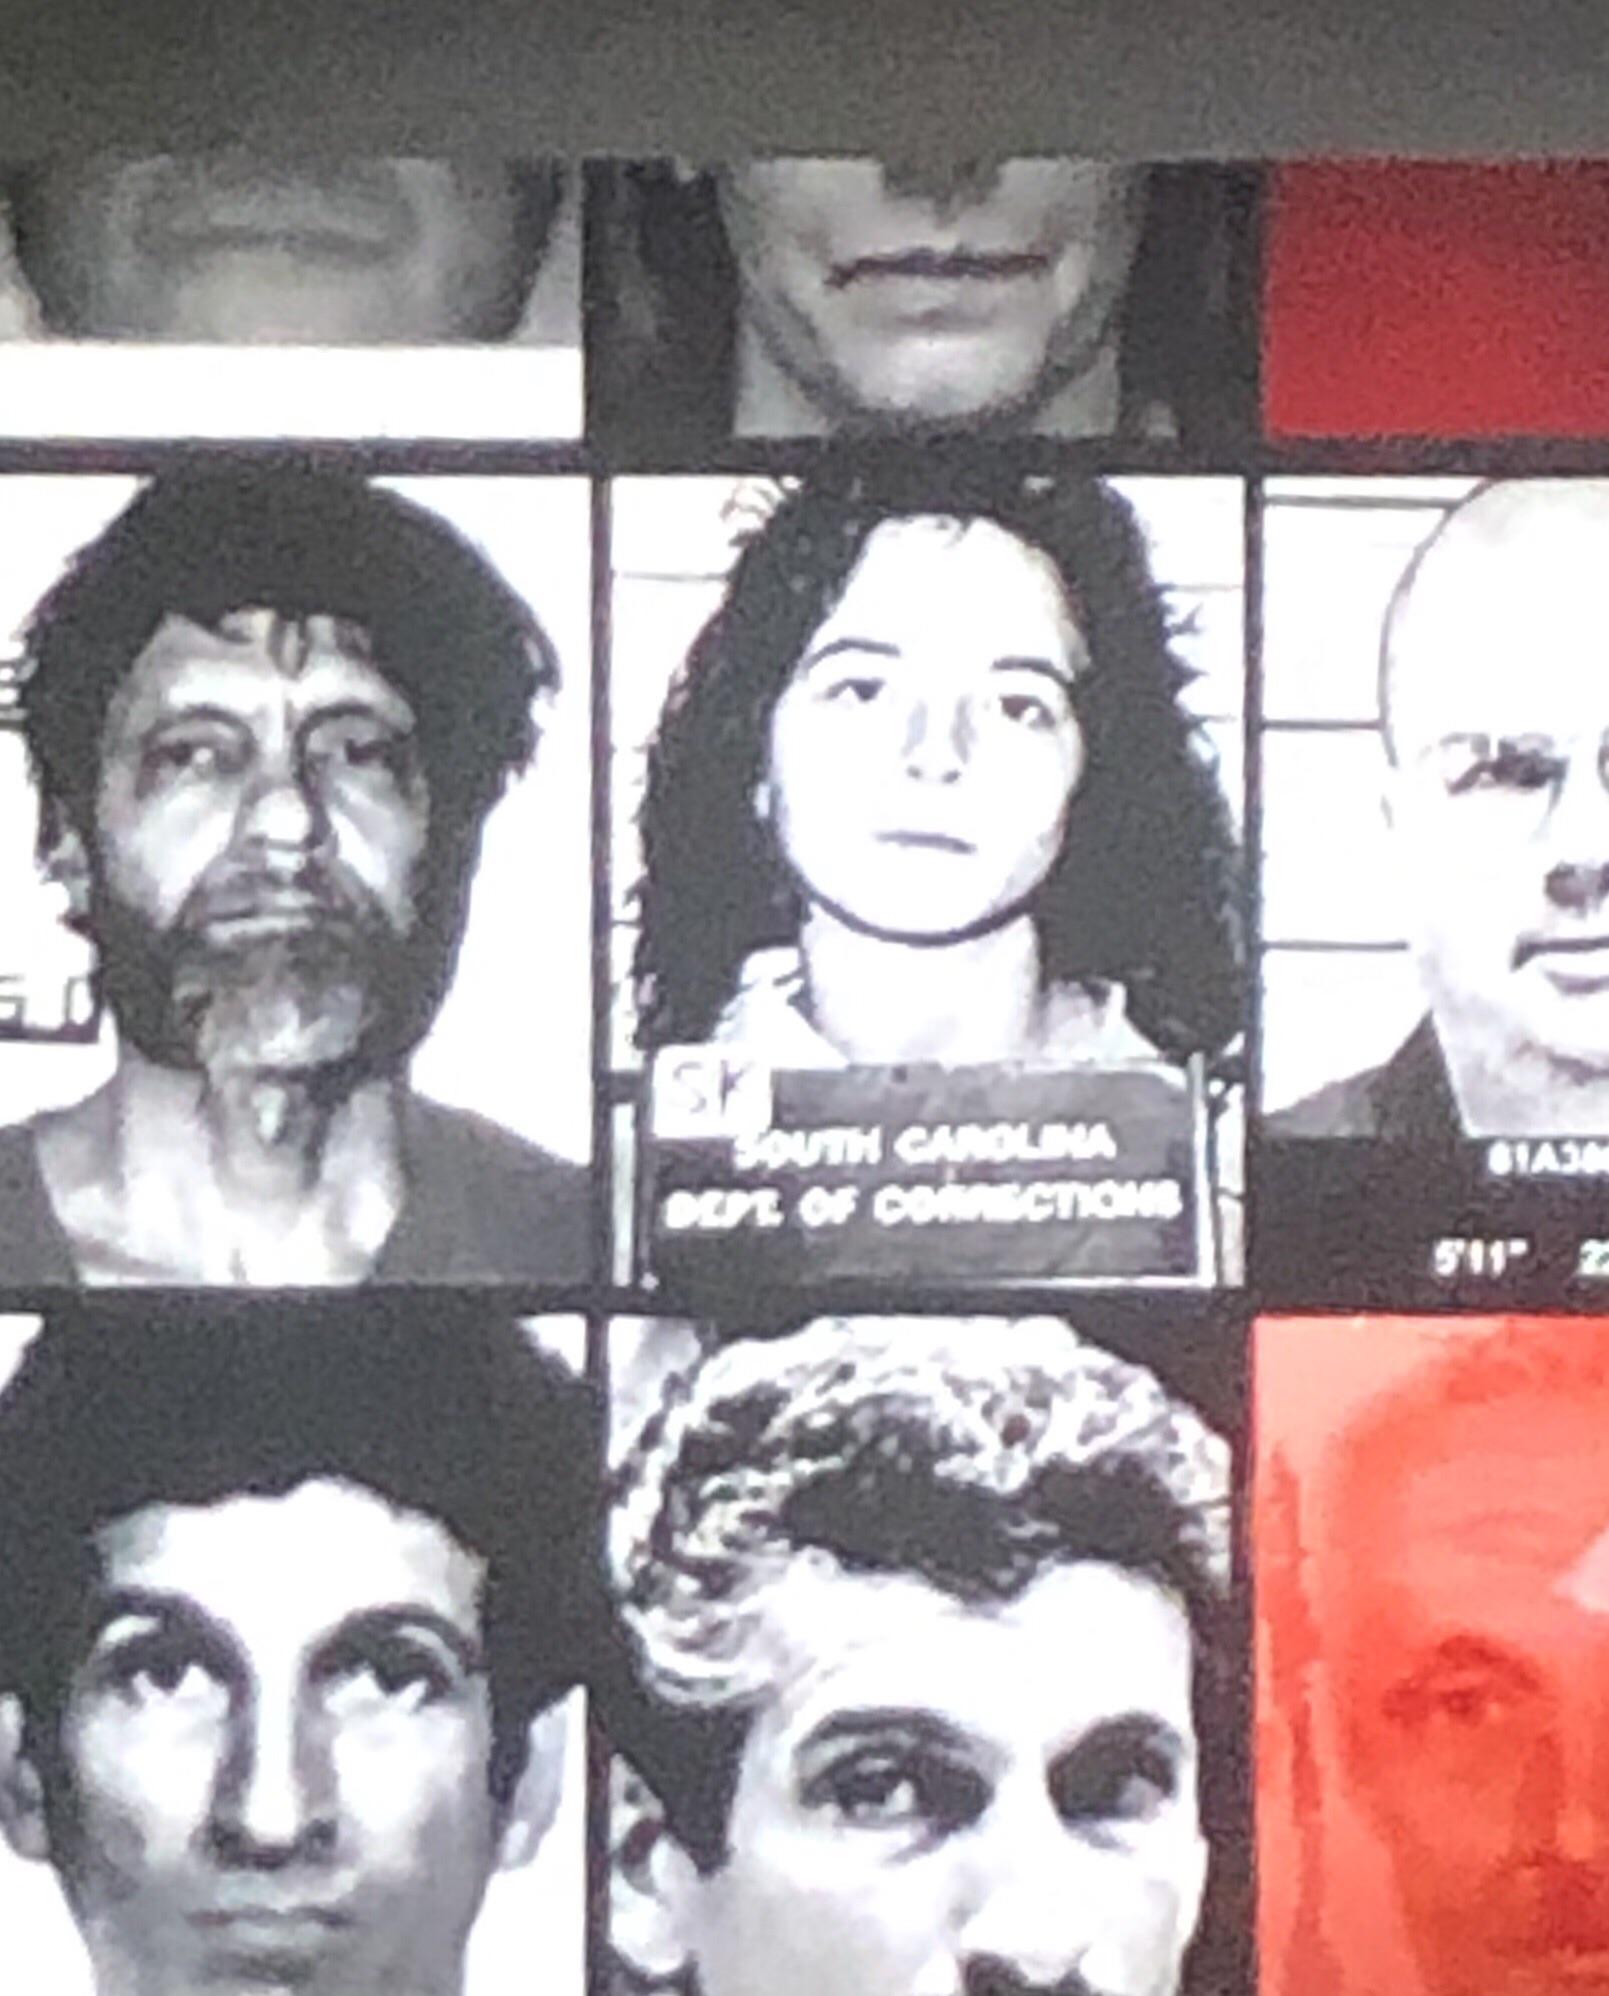 criminal minds serial killers in opening credits